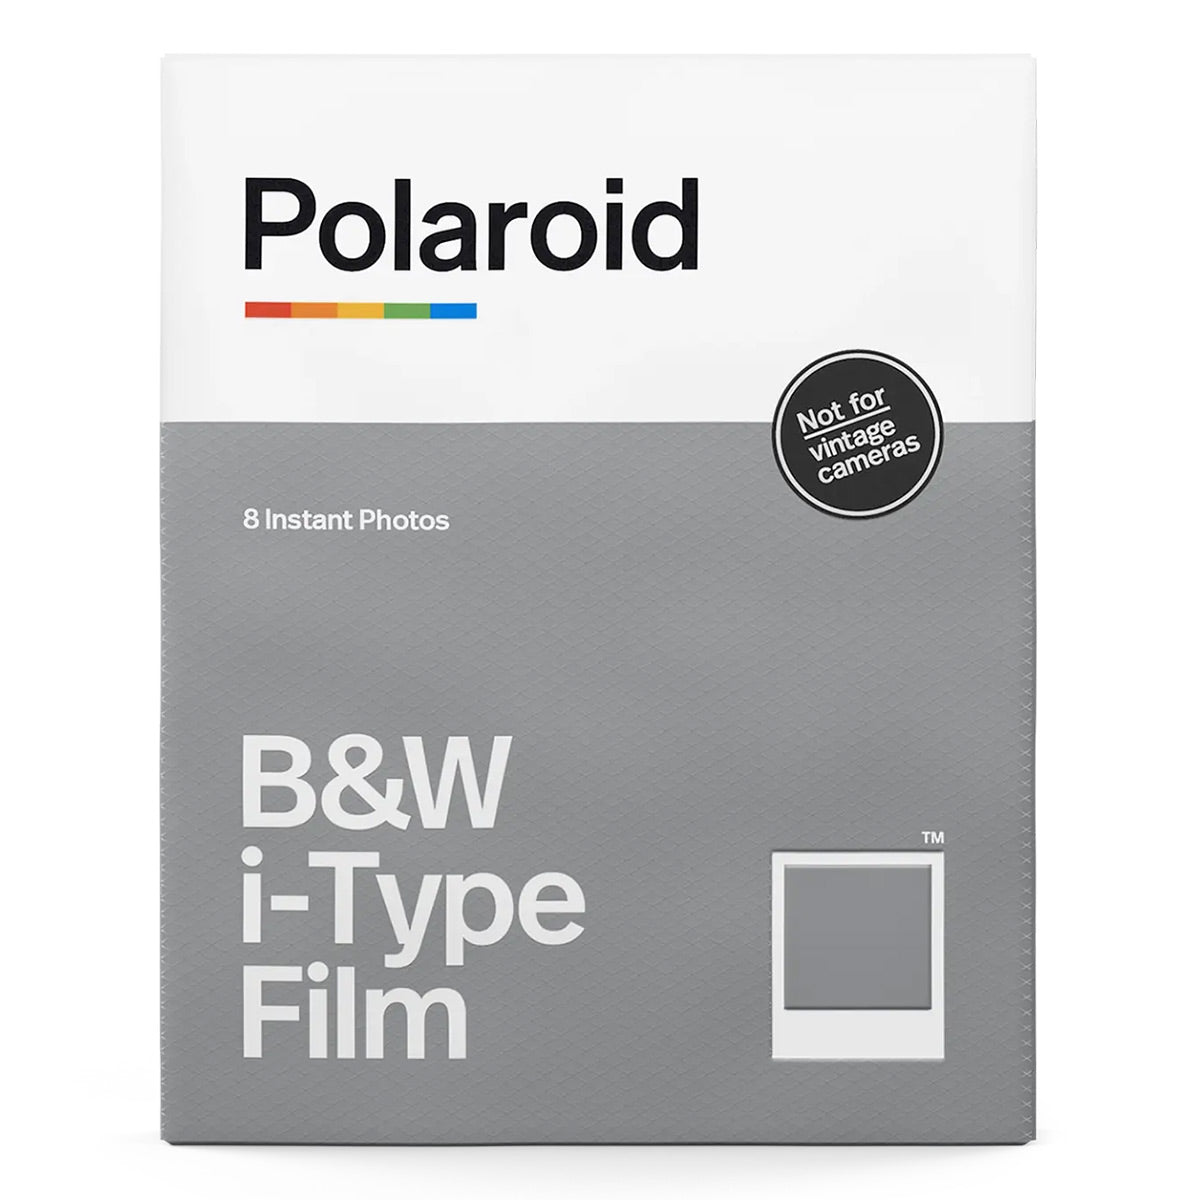 Polaroid B&W i-Type Film 8 Instant 3 x 3 Photographs for Now, Now+, Lab, OneStep 2, and OneStep+ Cameras